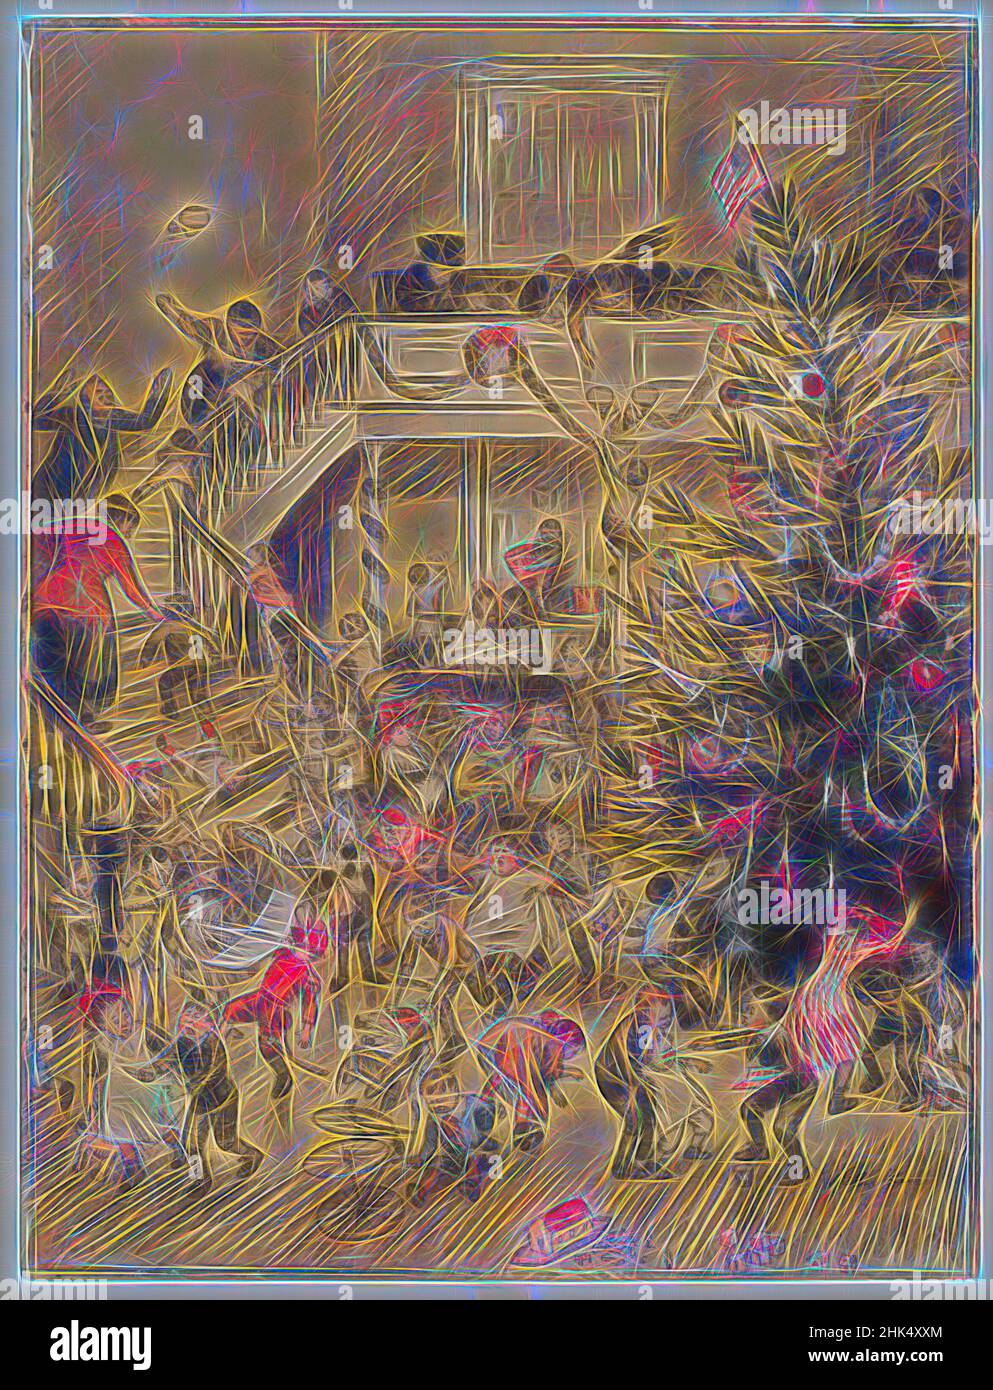 Inspired by Merry Christmas, Yuletide Revels, William Glackens, American, 1870-1938, Graphite, Conté crayon, ink, and transparent and opaque watercolor on laminated board adhered to wood pulp board, ca. 1910, Sheet: 24 3/8 x 18 1/2 in., 61.9 x 47 cm, 20th Century, American, american art, American, Reimagined by Artotop. Classic art reinvented with a modern twist. Design of warm cheerful glowing of brightness and light ray radiance. Photography inspired by surrealism and futurism, embracing dynamic energy of modern technology, movement, speed and revolutionize culture Stock Photo